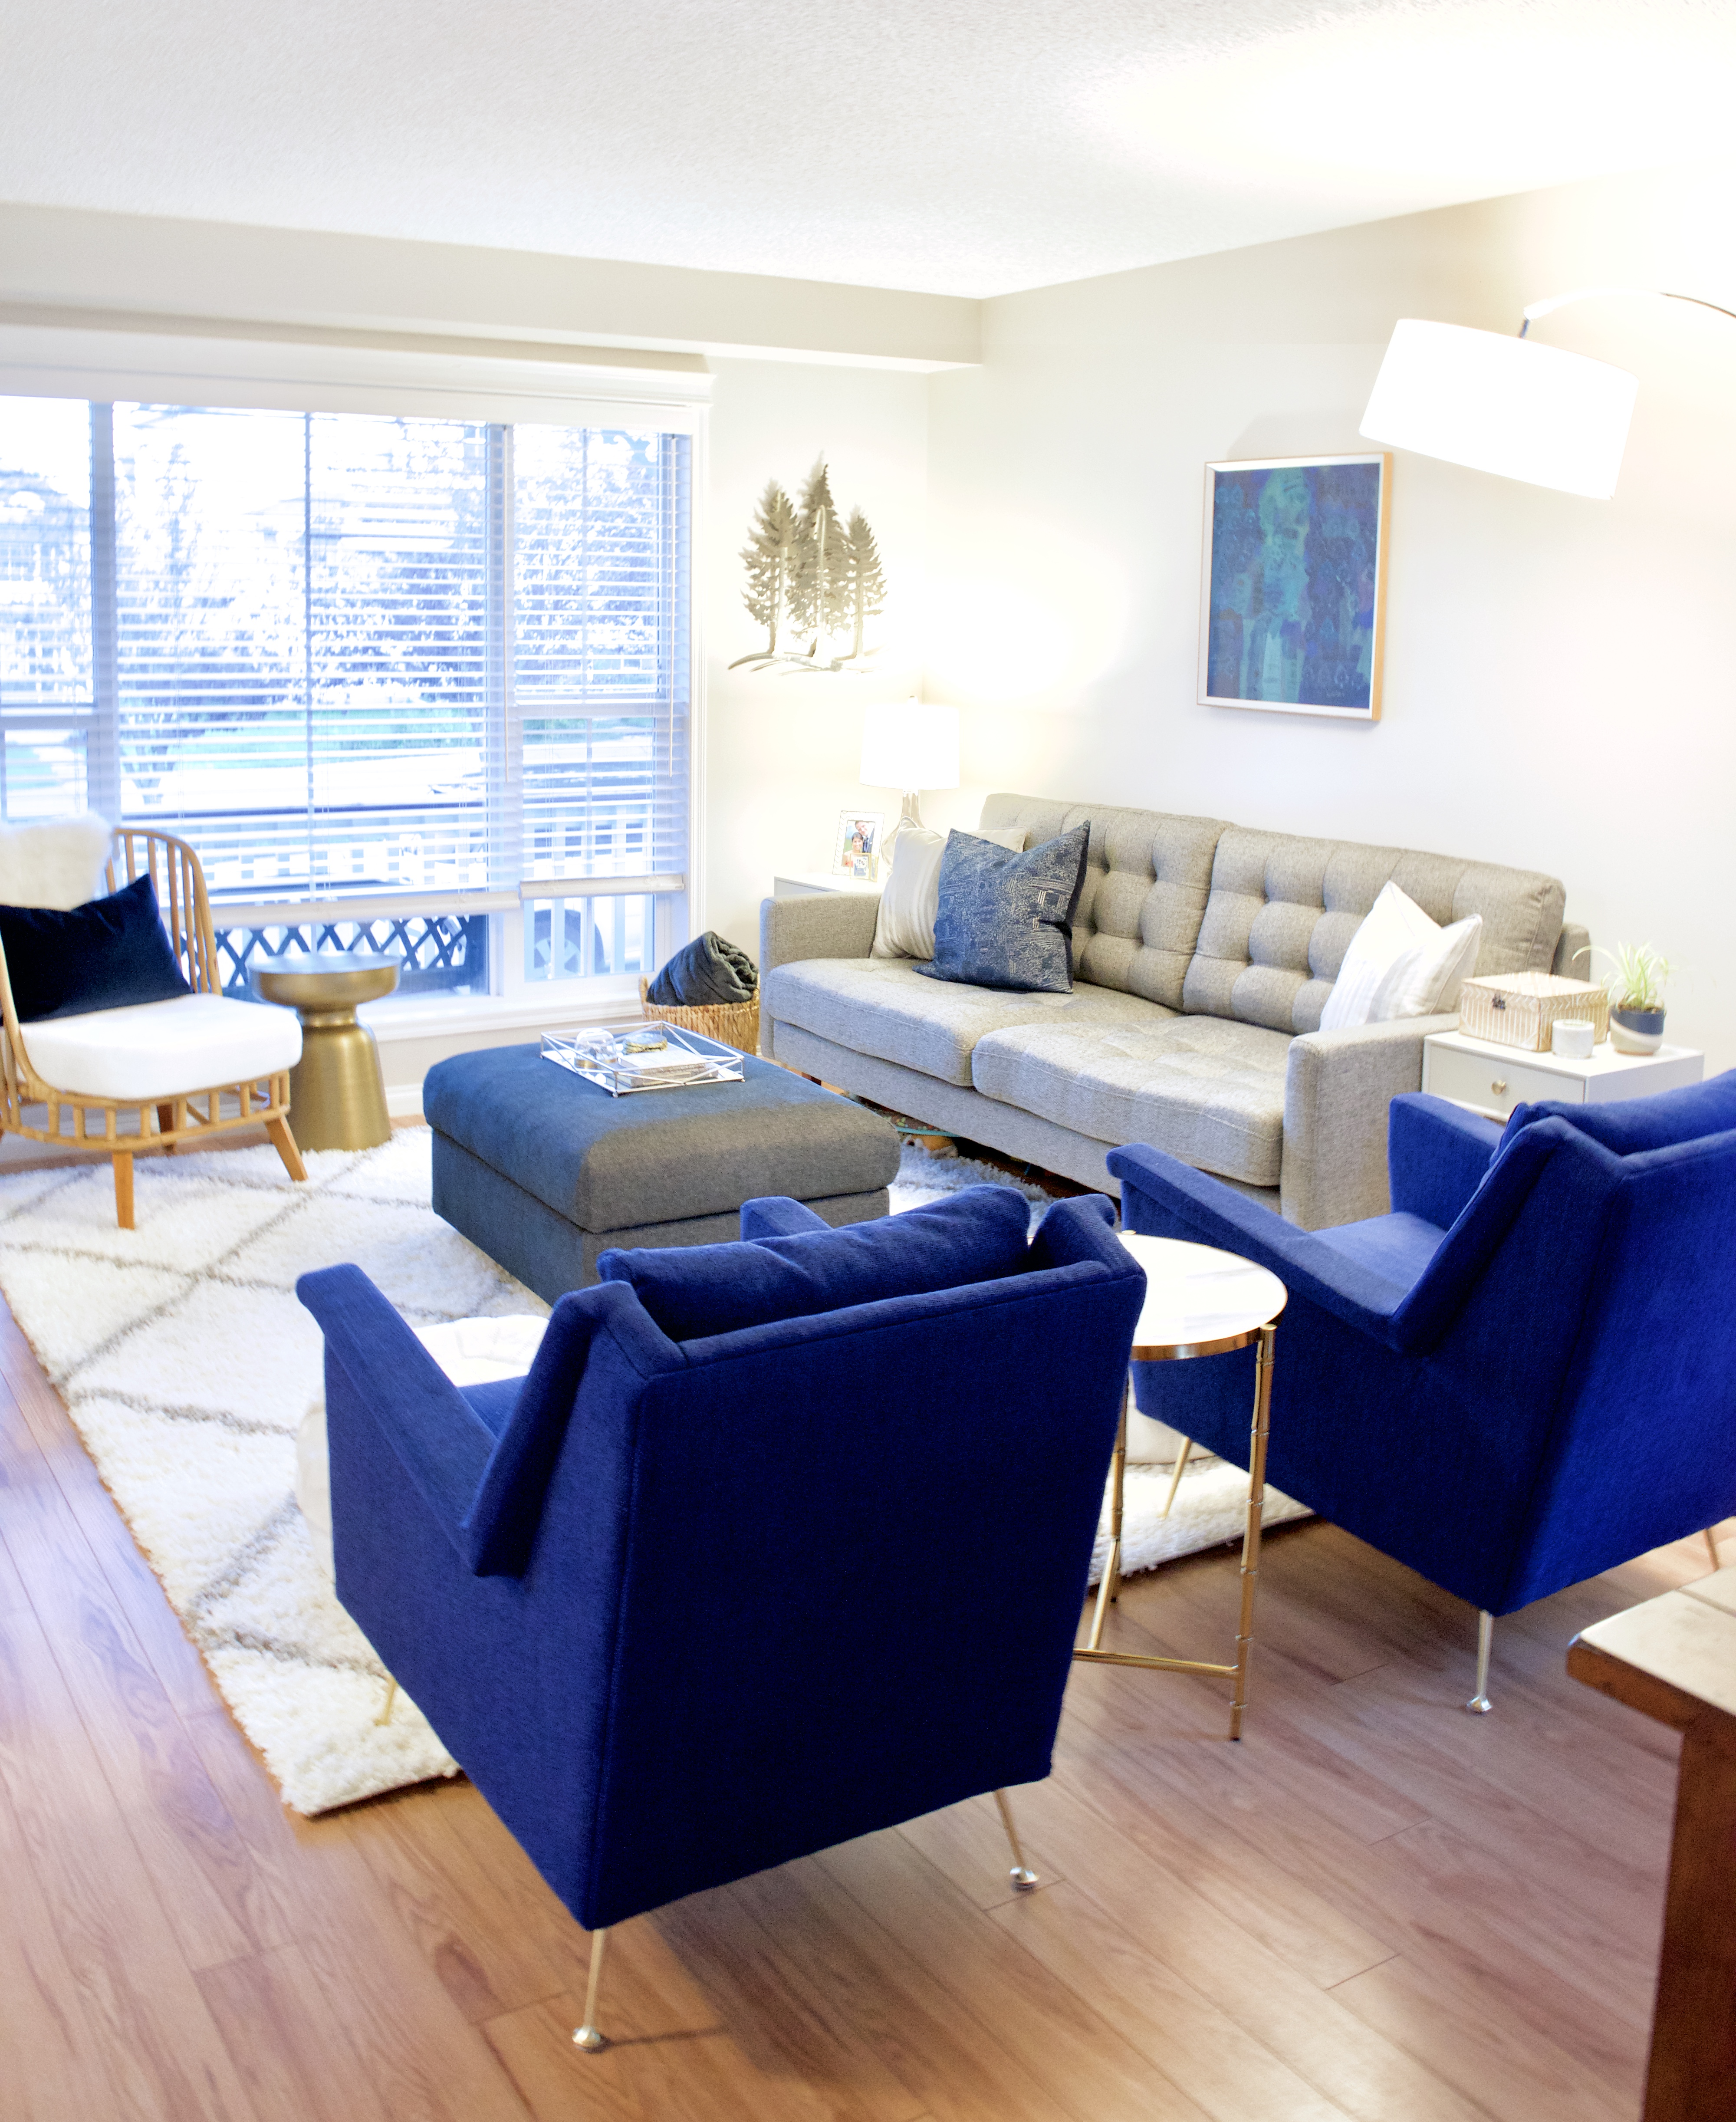 Living Room Makeover:  Family-Friendly Function Meets Grown-Up Style